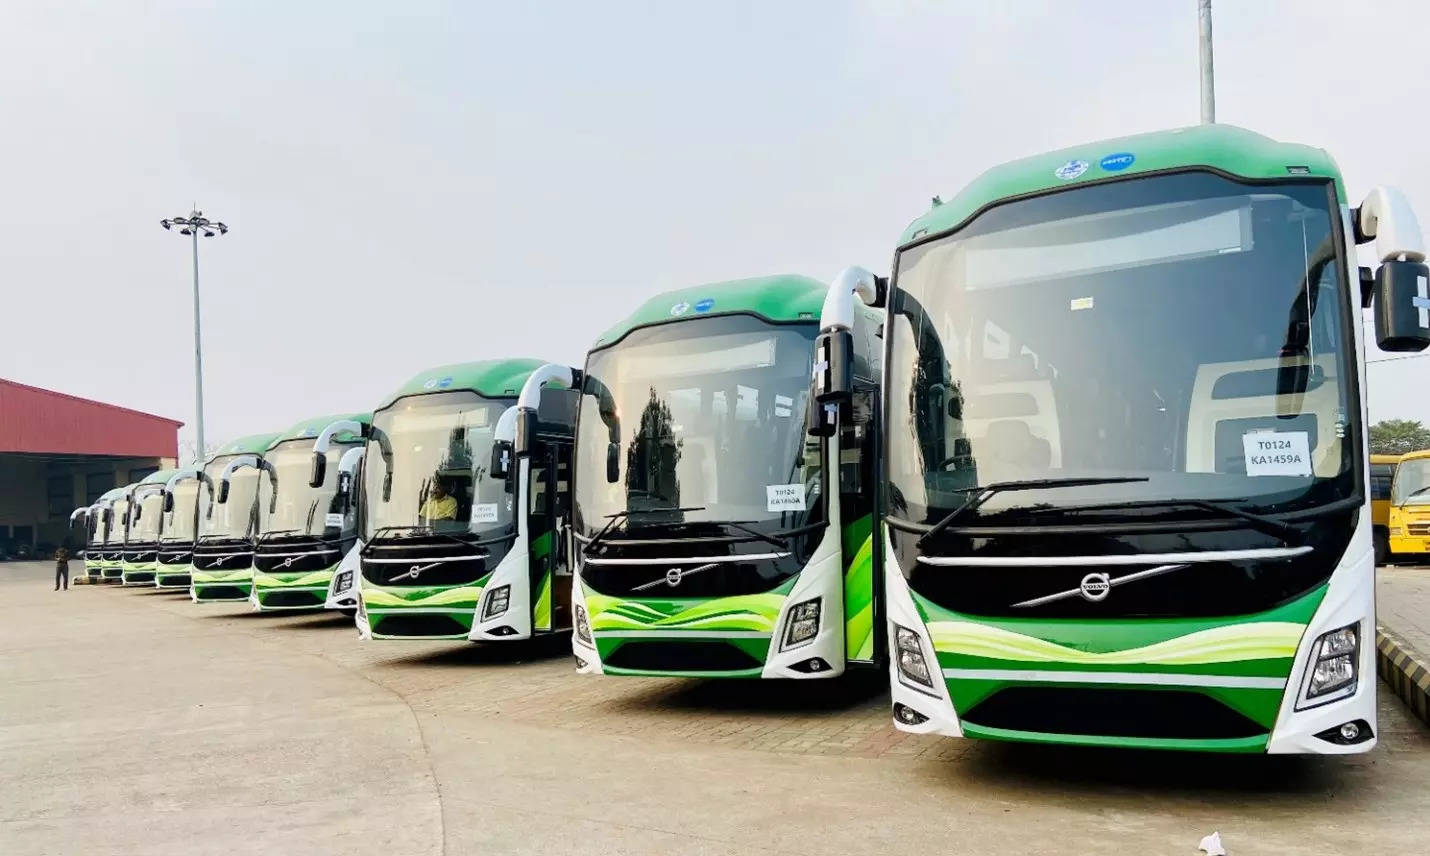 <p> Volvo 9600 multi-axle 15m coaches will come equipped with pushback Luxury Seater, Semi-sleeper and Sleeper configurations, the company said in a media release.</p>